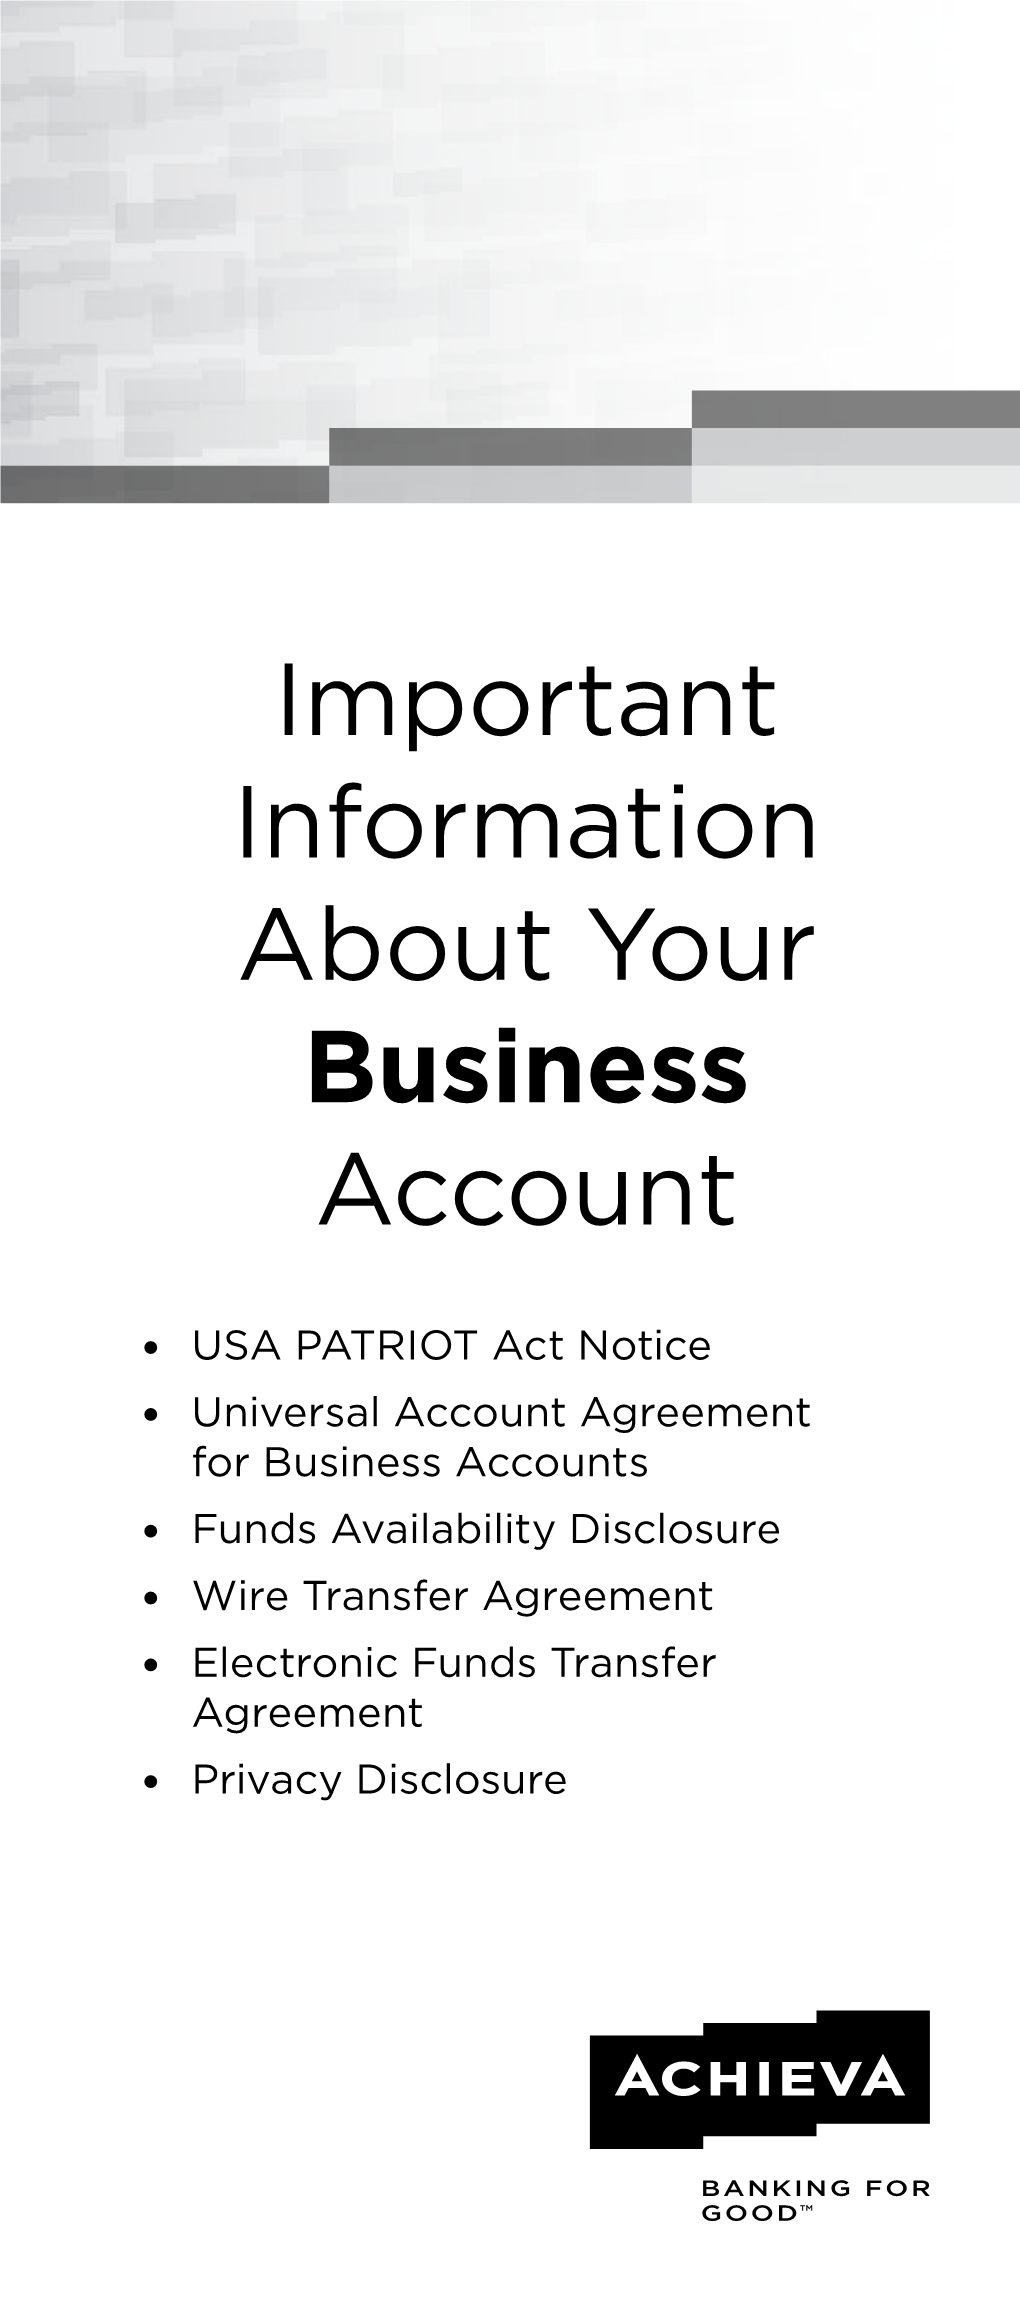 Important Information About Your Business Account